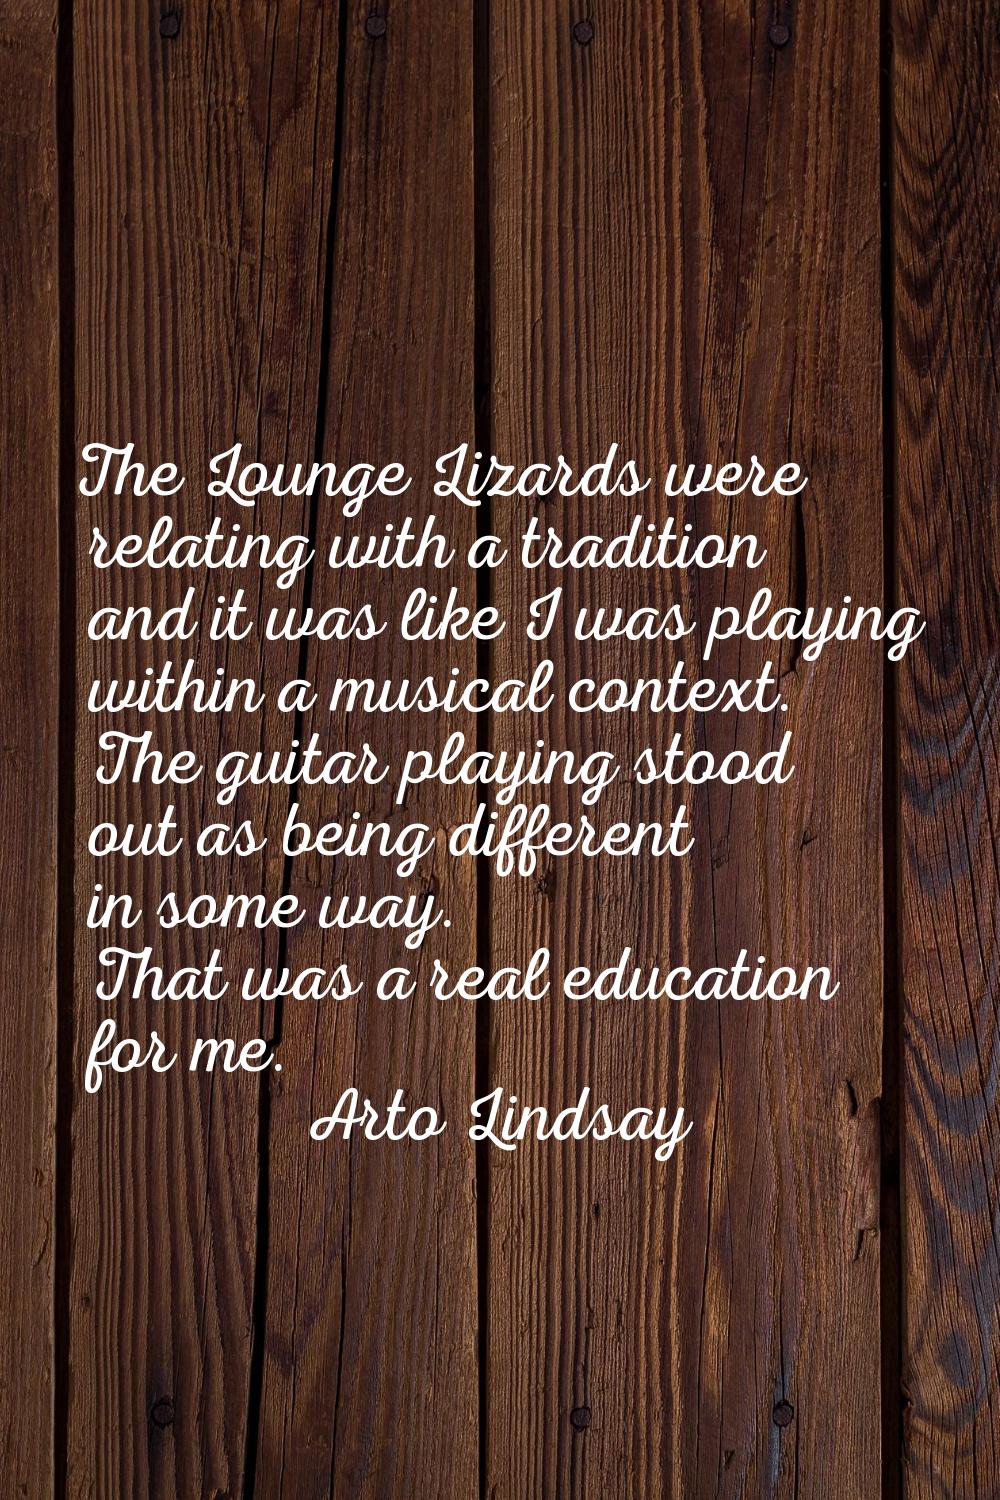 The Lounge Lizards were relating with a tradition and it was like I was playing within a musical co